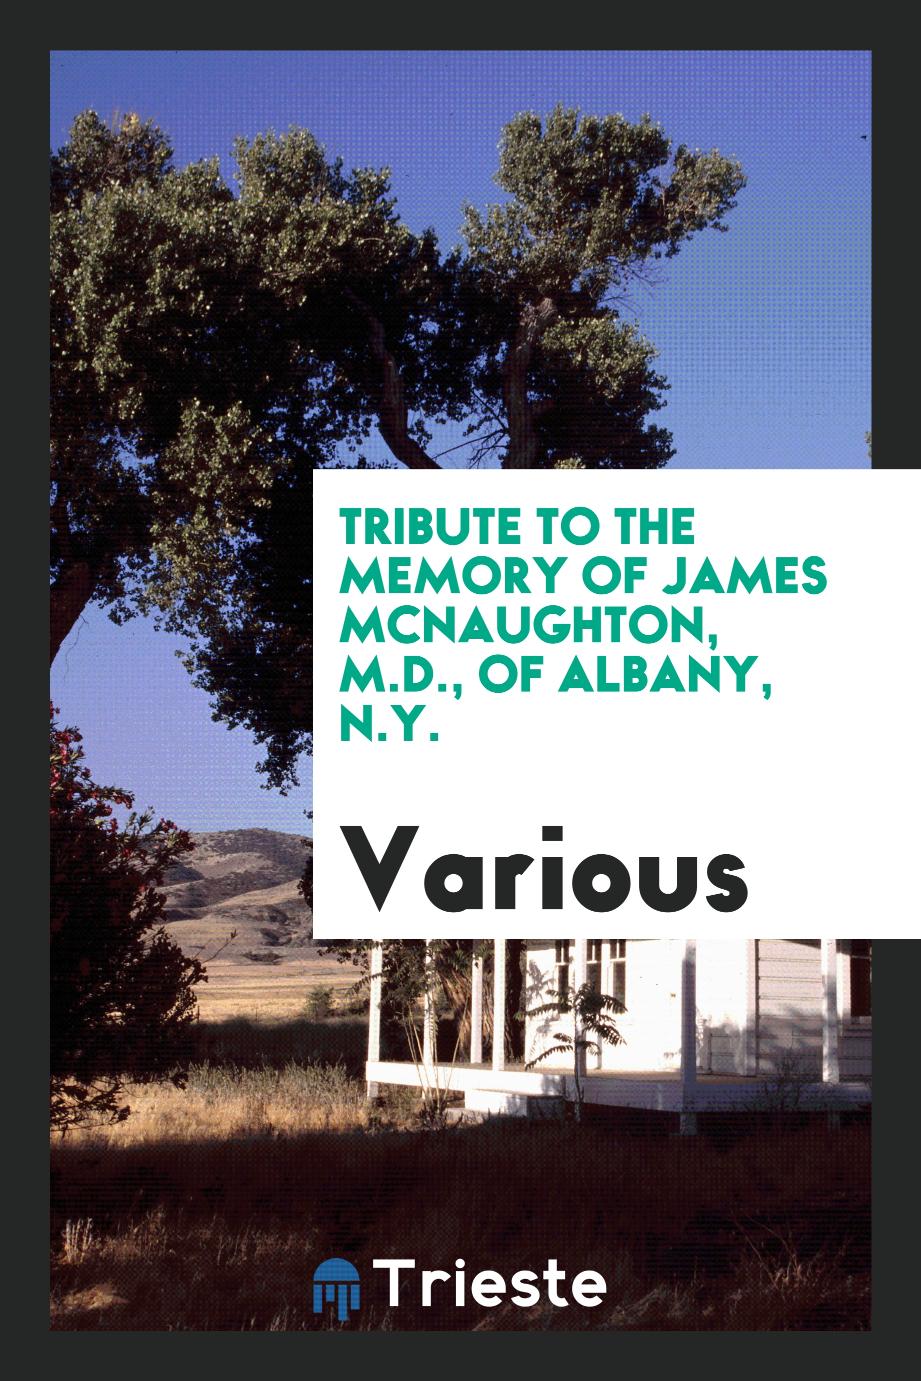 Tribute to the Memory of James McNaughton, M.D., of Albany, N.Y.